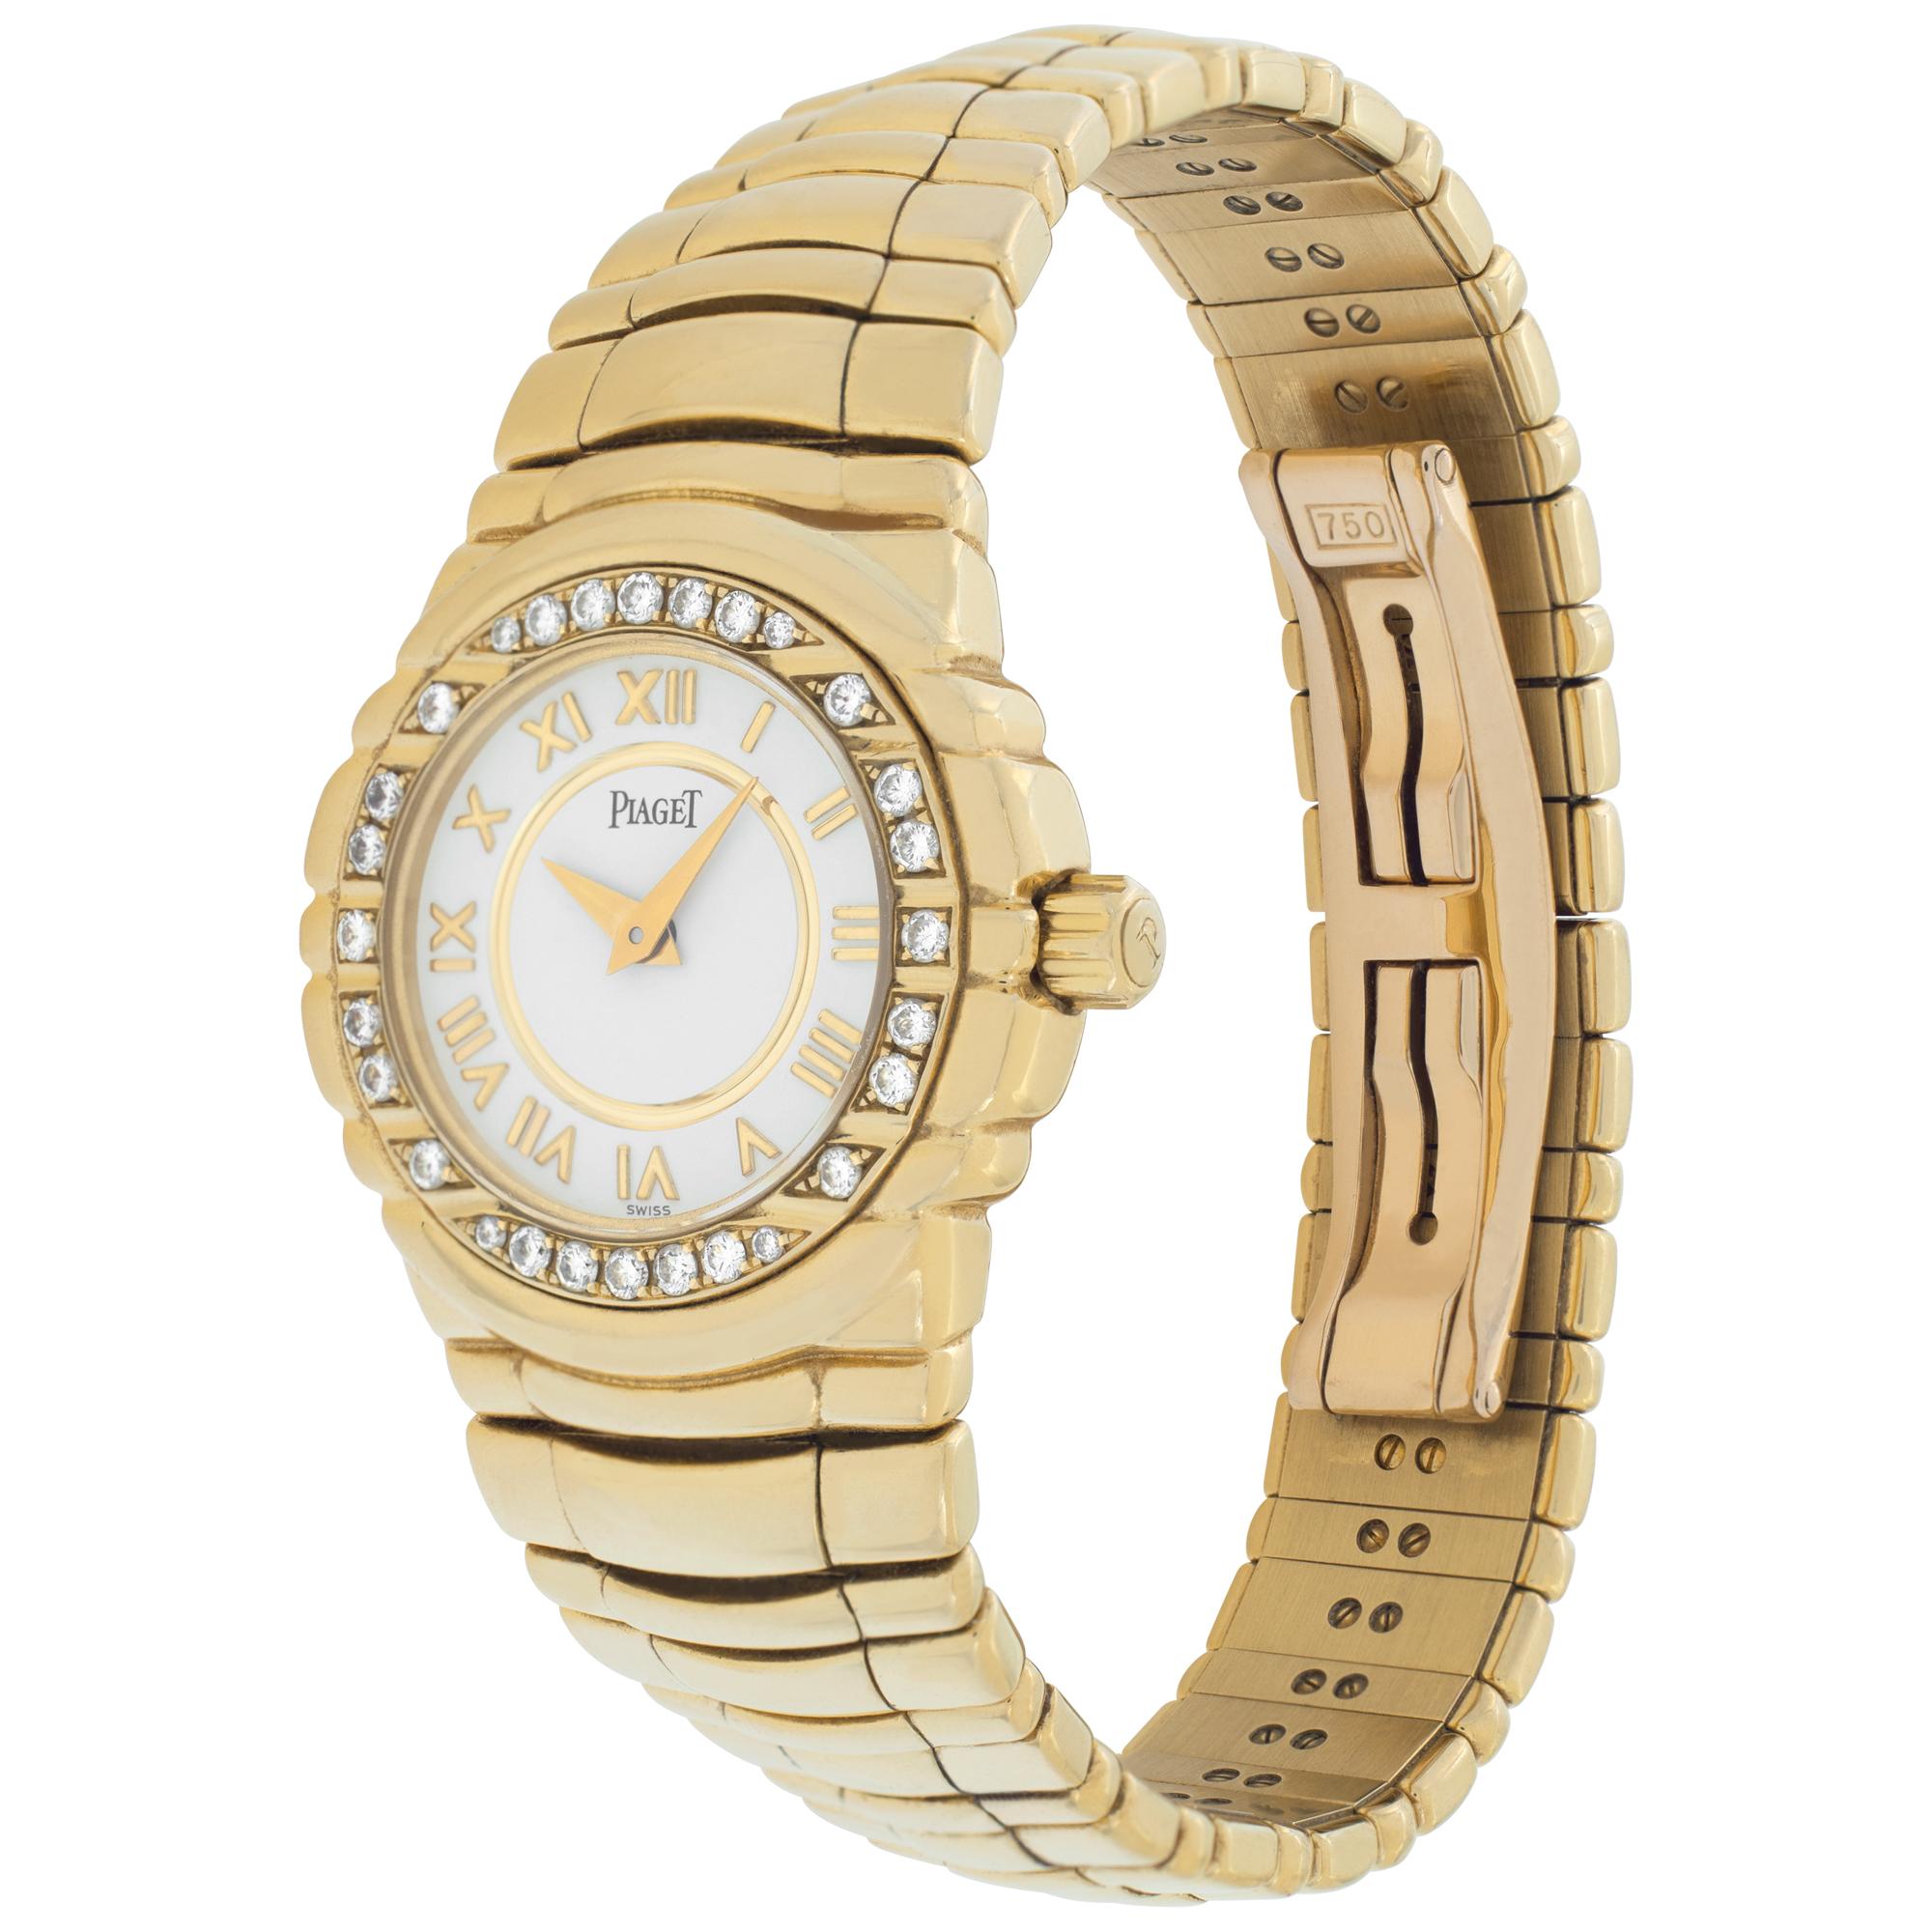 Piaget Tanagra in 18k yellow gold with original diamond bezel. White dial with gold applied Roman numerals. Quartz. 25 mm case size. Ref 16033 m 401 d. Circa 2000s. Fine Pre-owned Piaget Watch. Certified preowned Dress Piaget Tanagra 16033 m 401 d